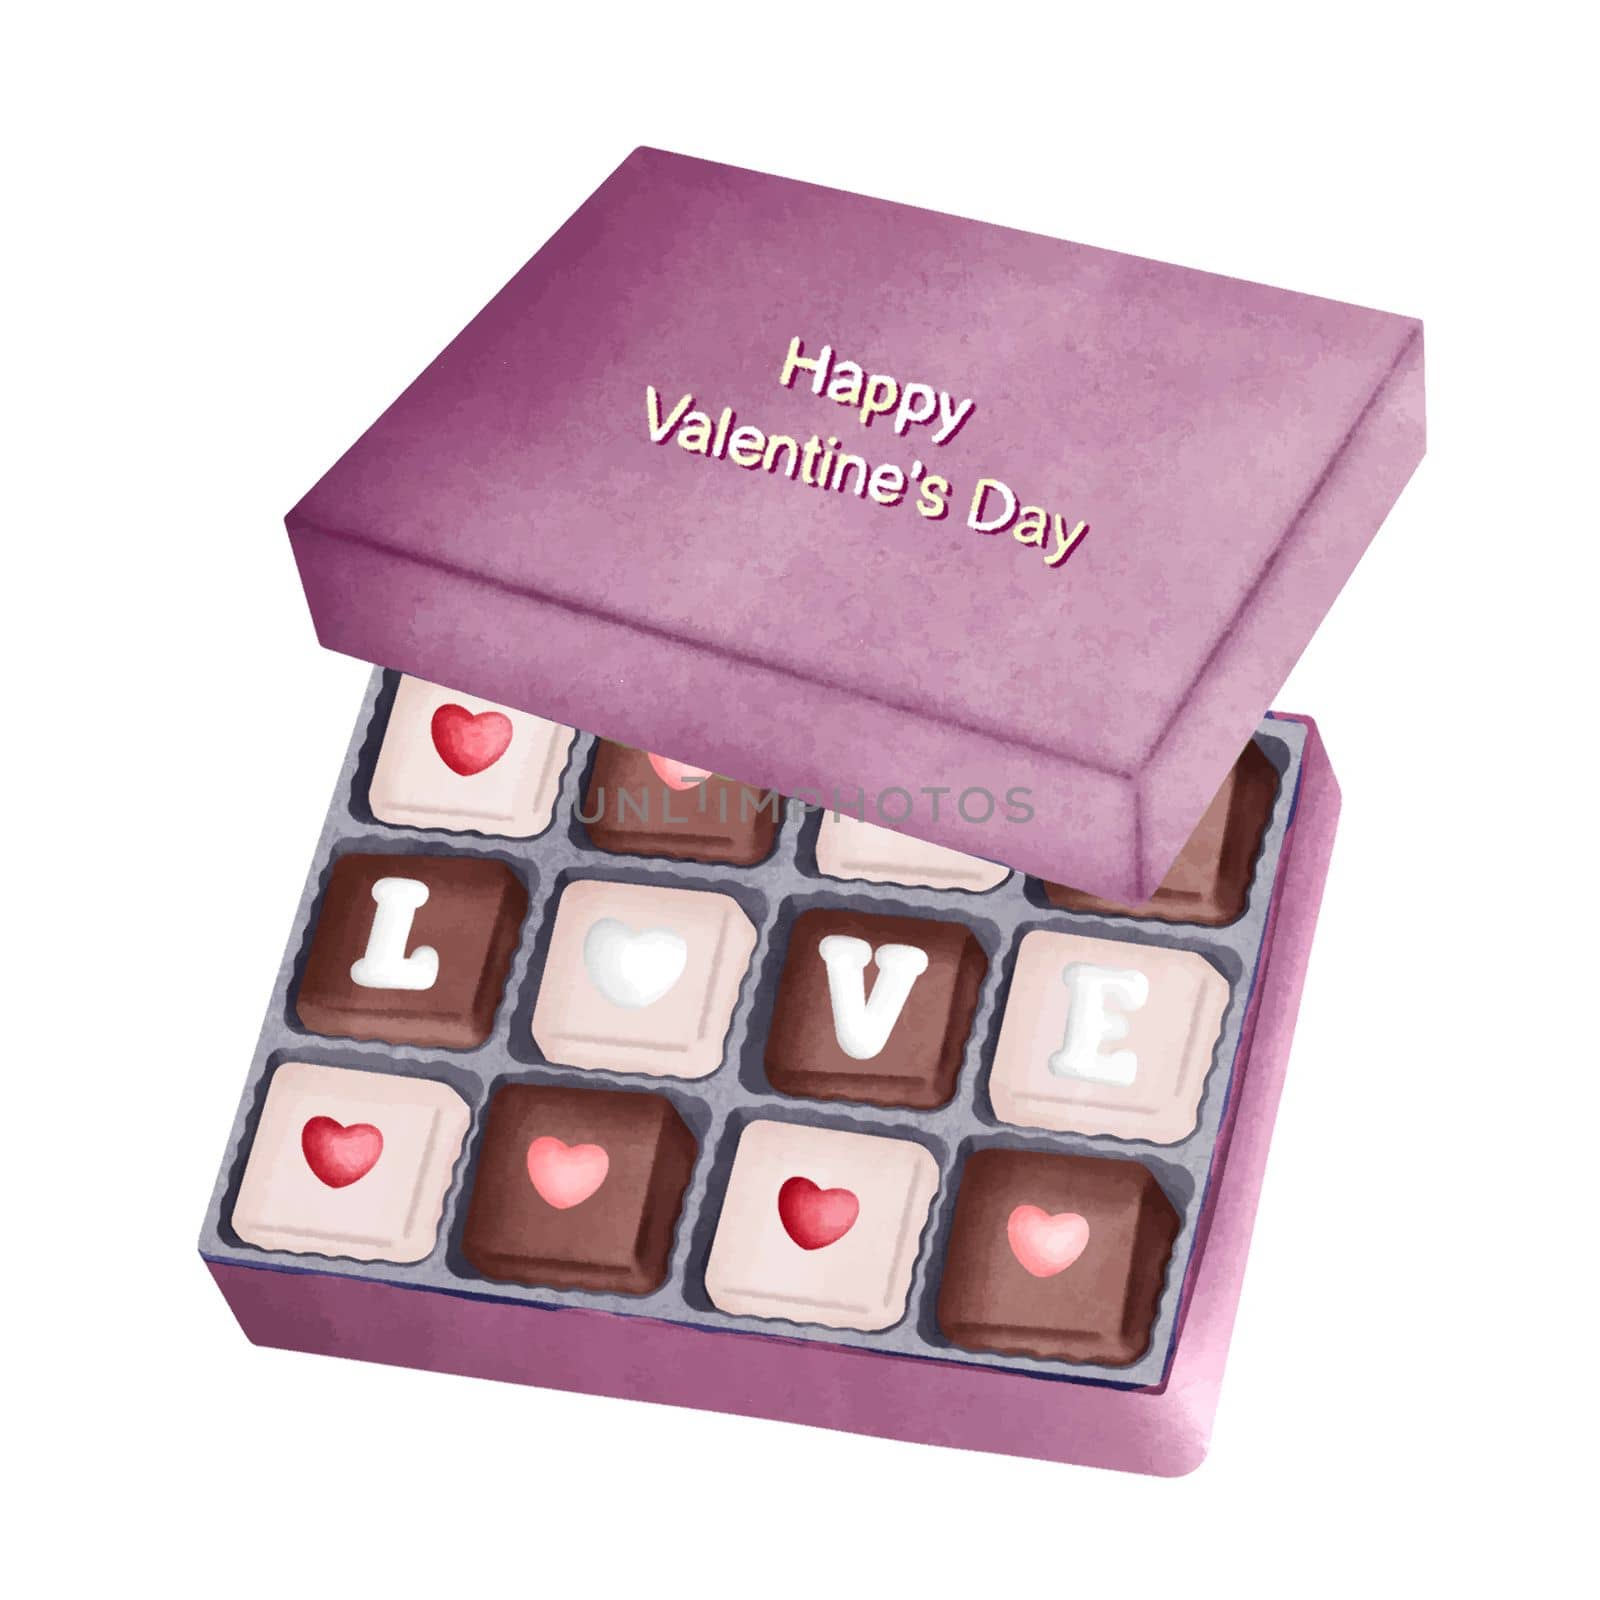 Chocolate Love Box Watercolor Clipart PNG. Paris In Love with Valentine's Chocolate box watercolor illustration.